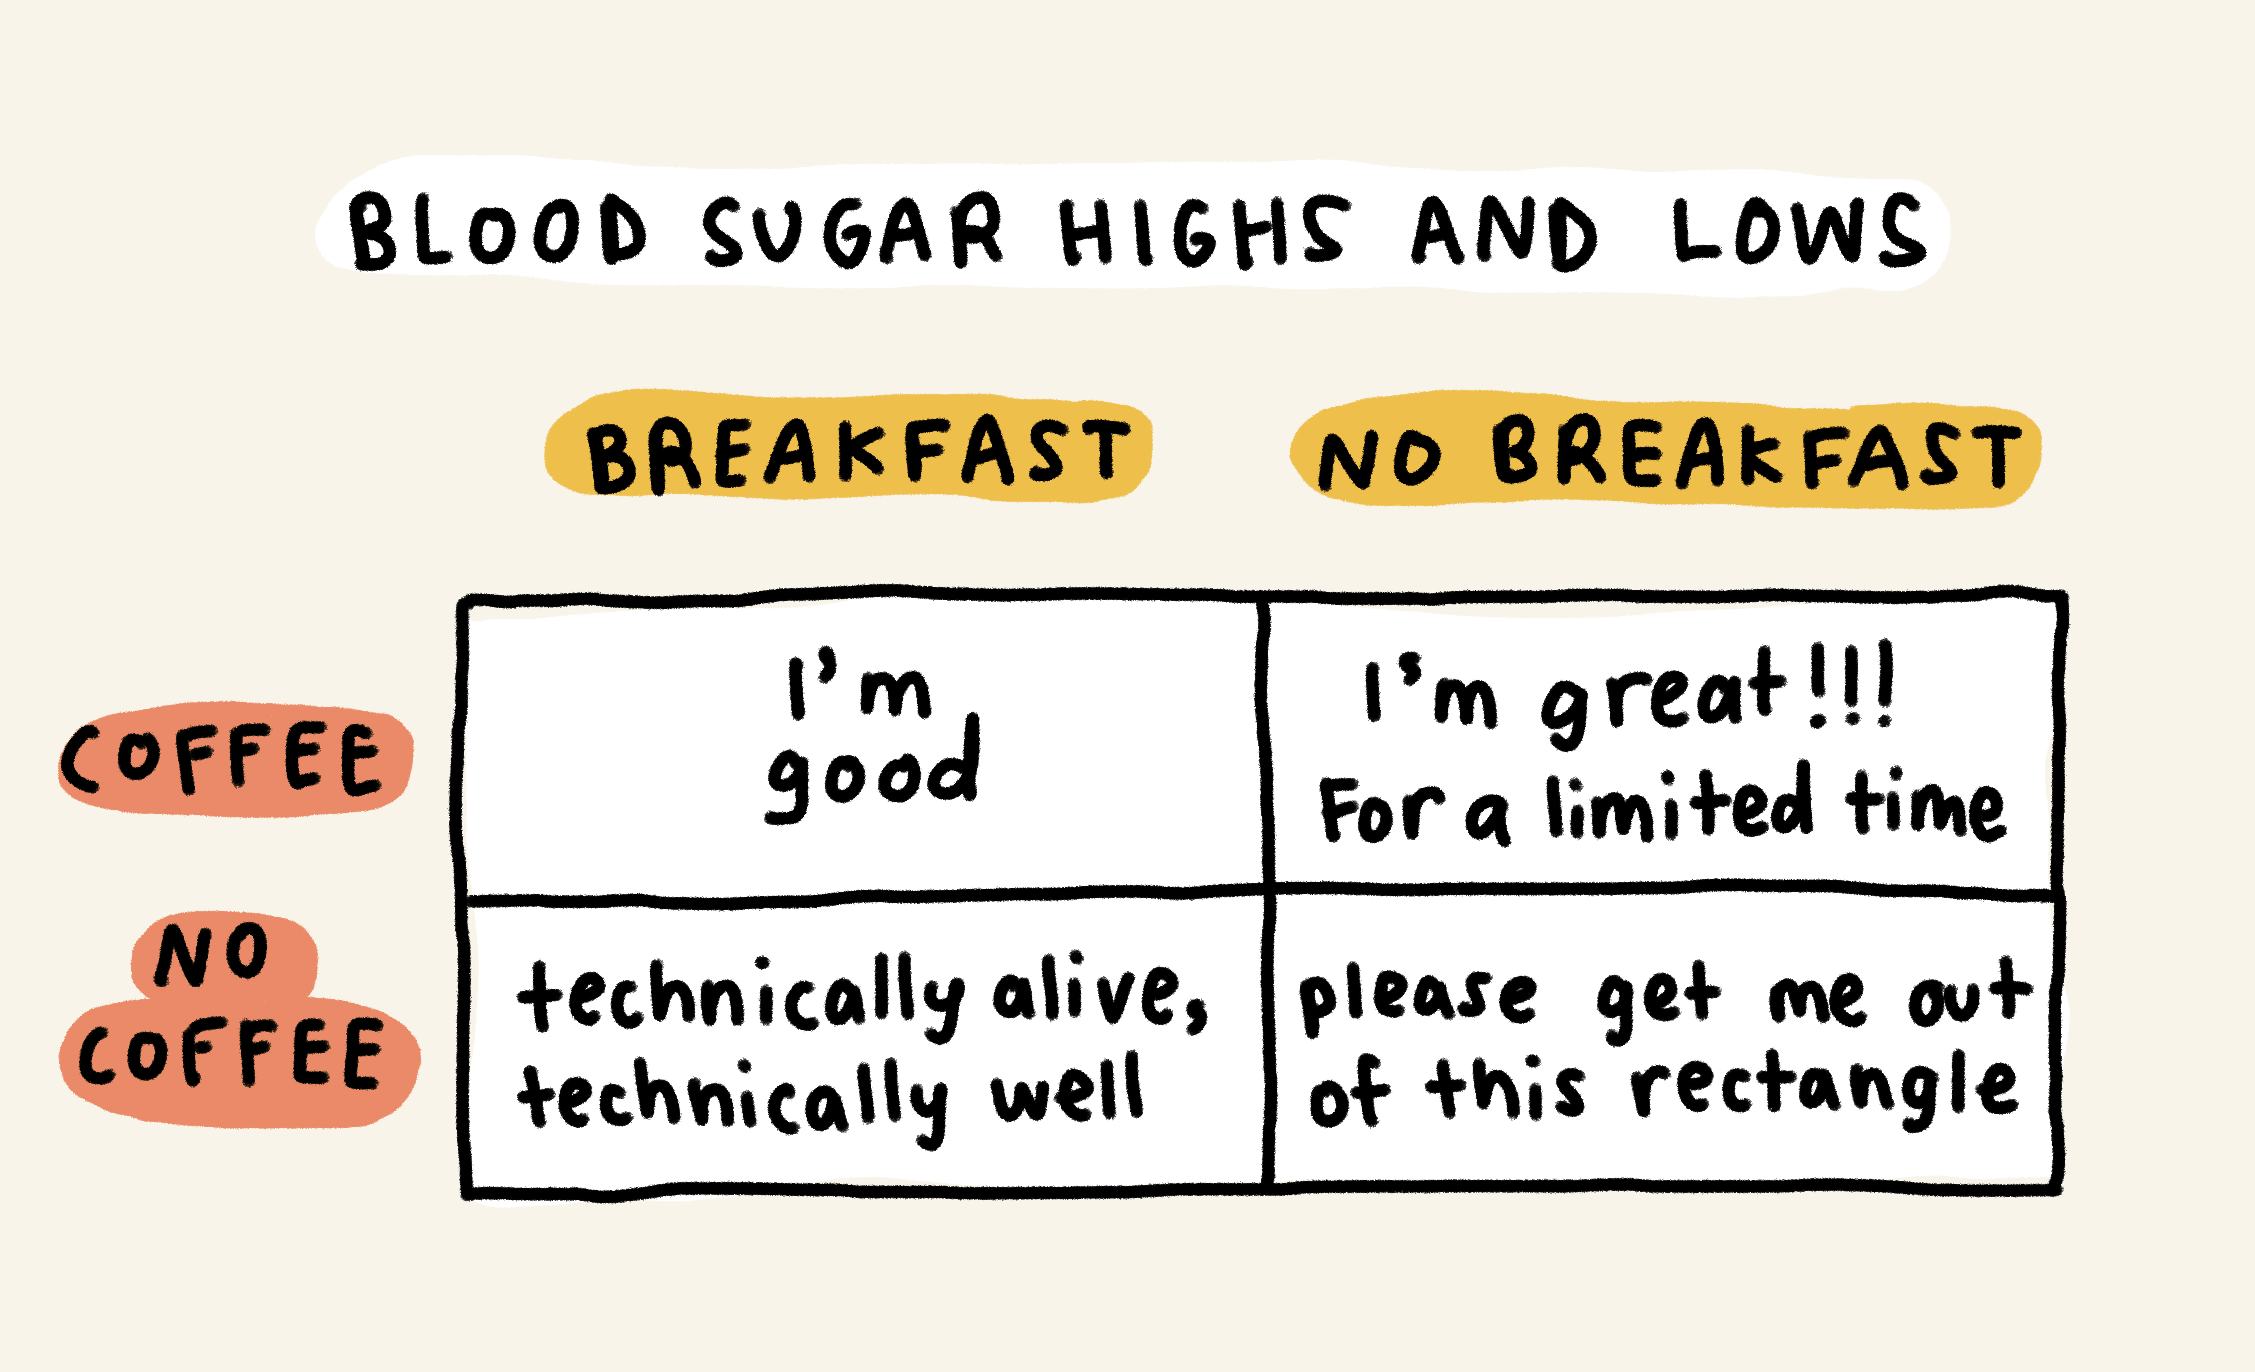 Blood sugar highs and lows

Breakfast + coffee = I'm good
No breakfast = coffee = I'm great!!! For a limited time
Breakfast + no coffee = technically alive, technically well 
No breakfast + no coffee = please get me out of this rectangle